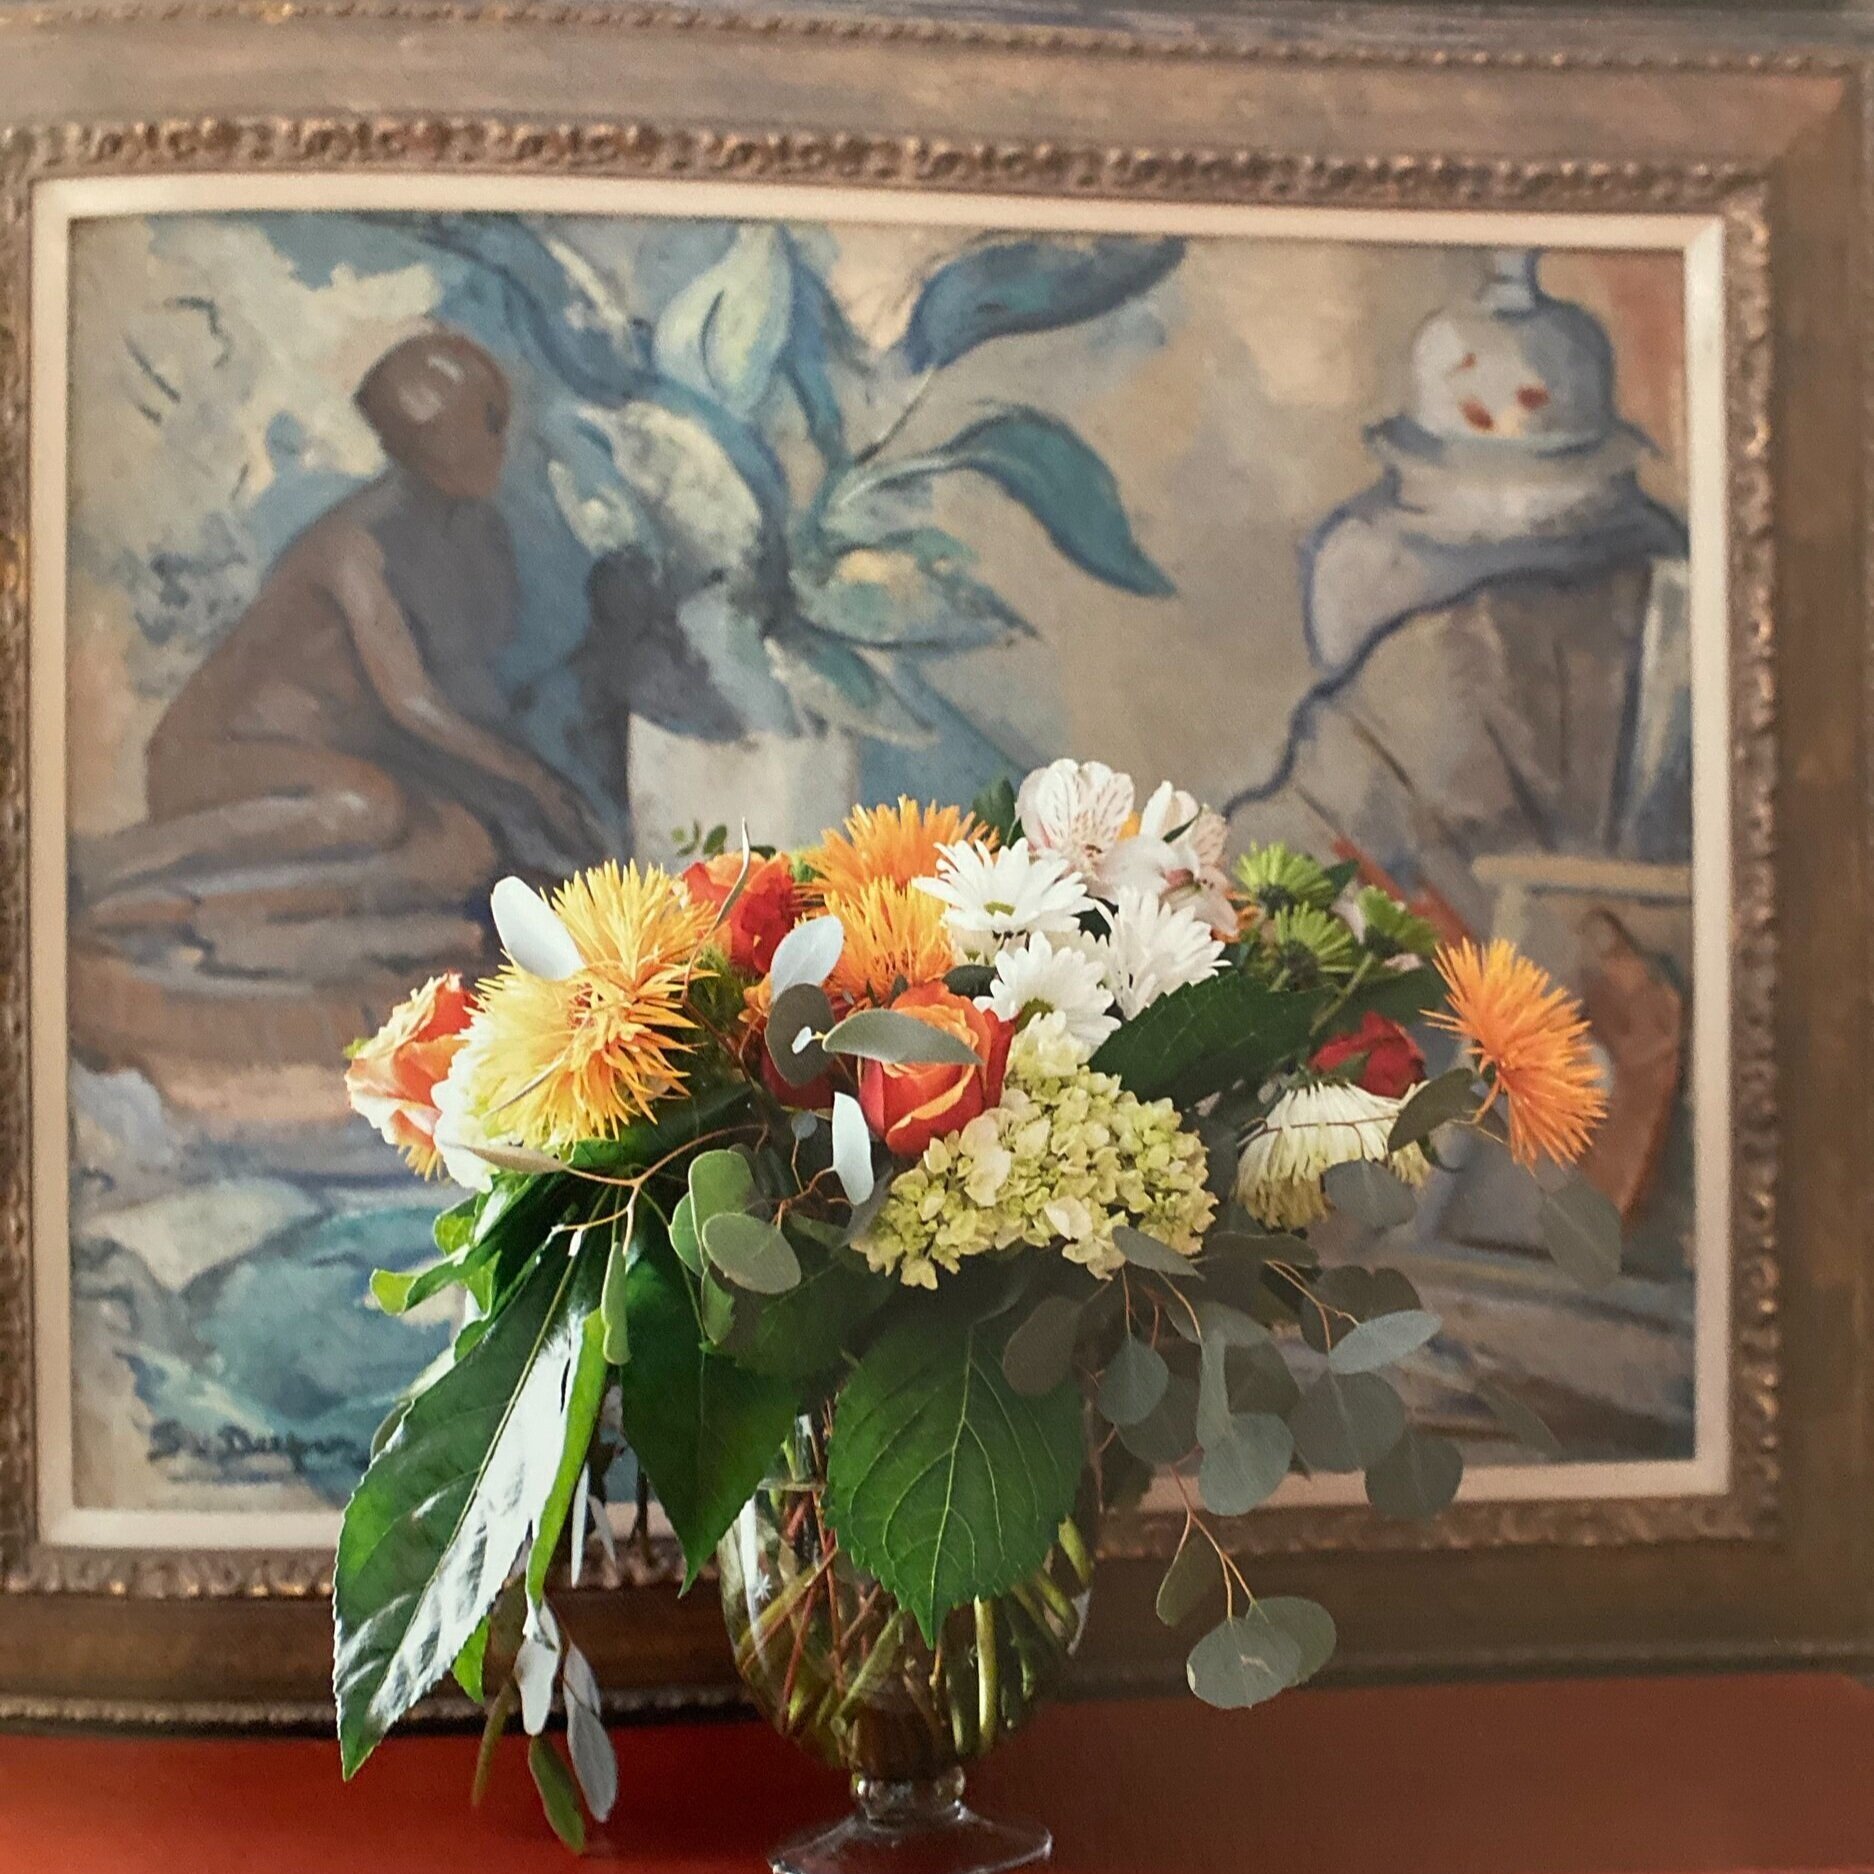  The hues of the flower arrangement draw the focus in with a muted oil painting behind. 